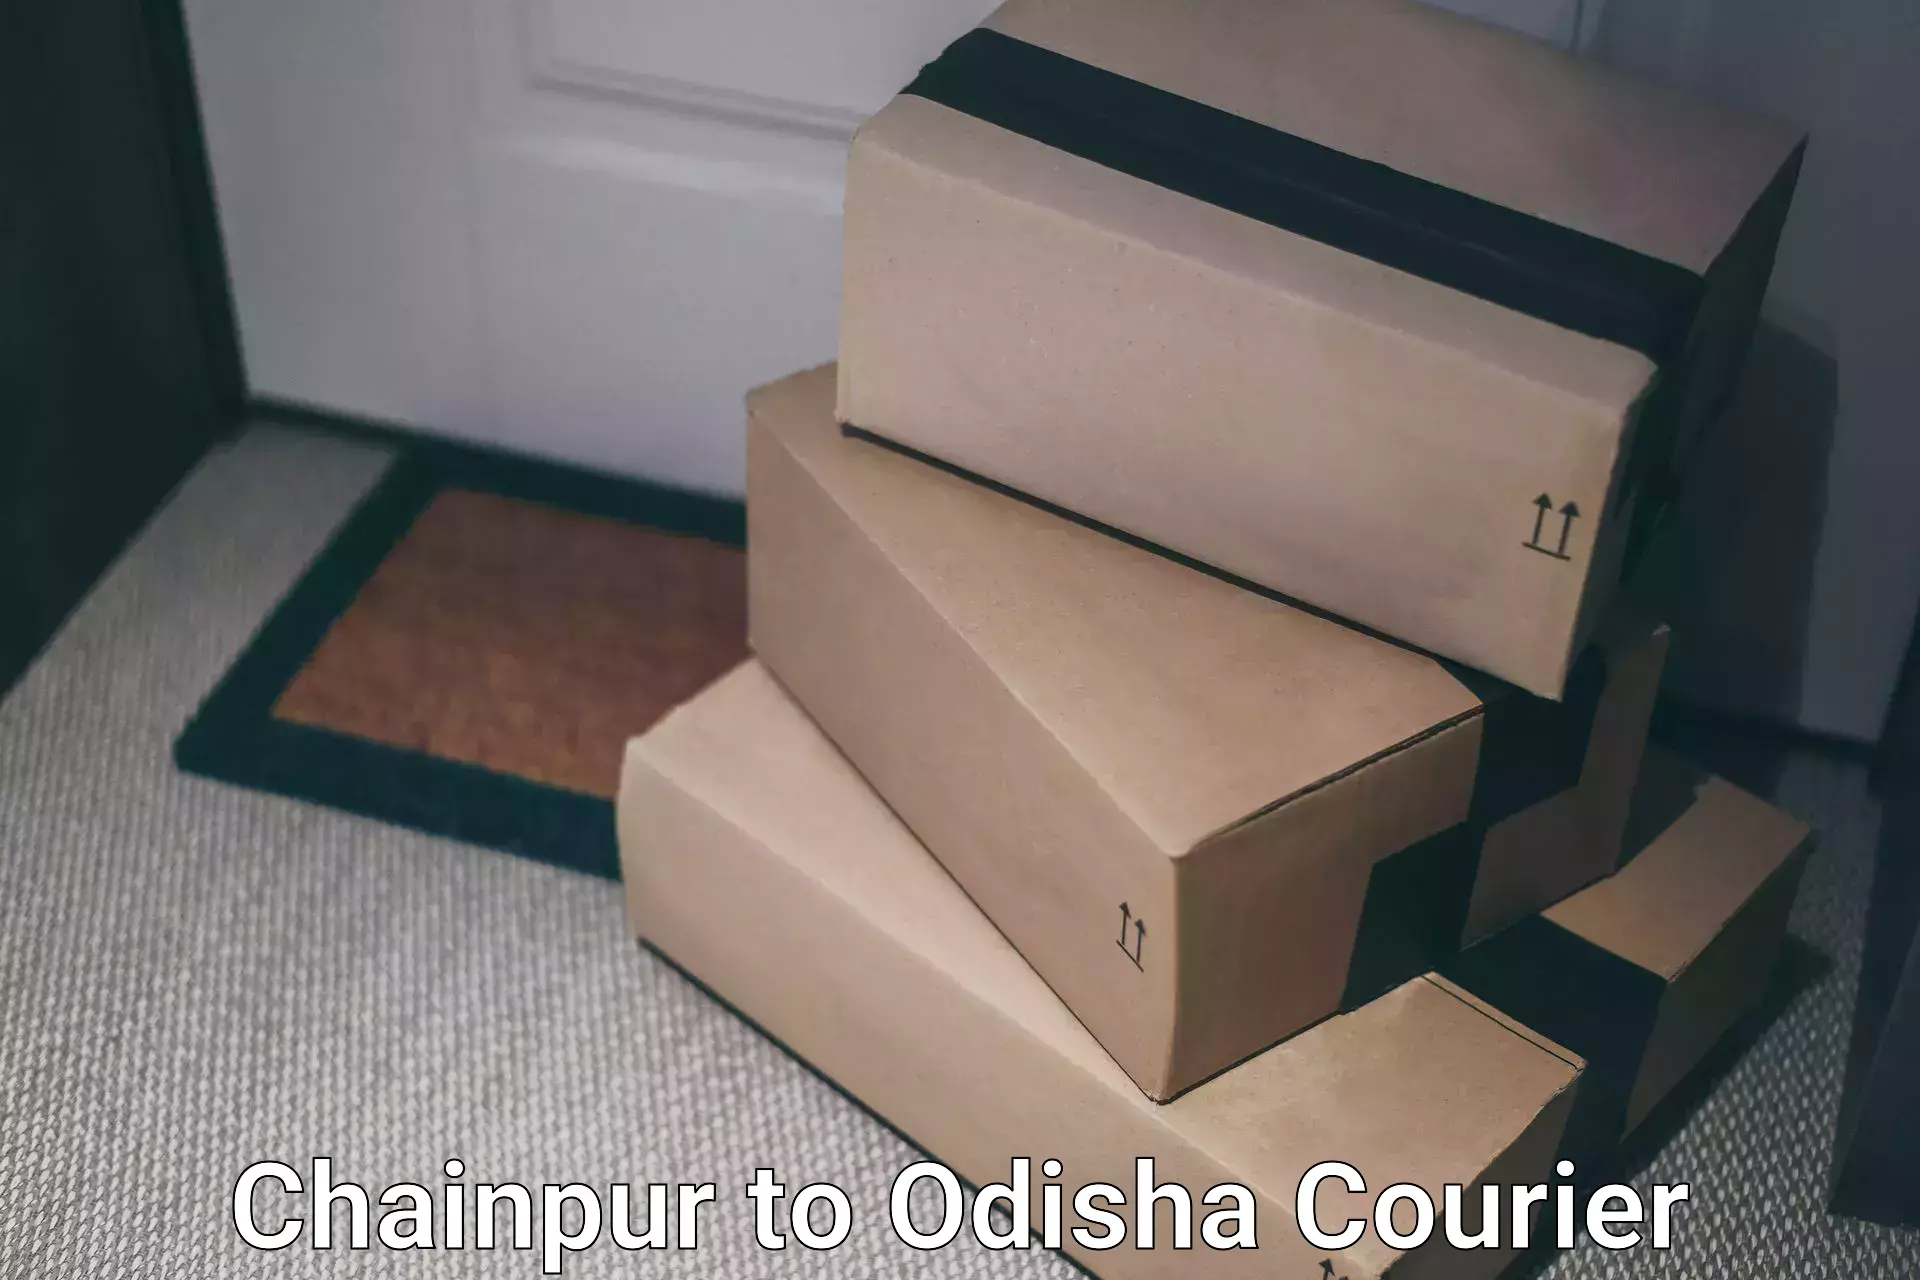 High-priority parcel service Chainpur to Paikana